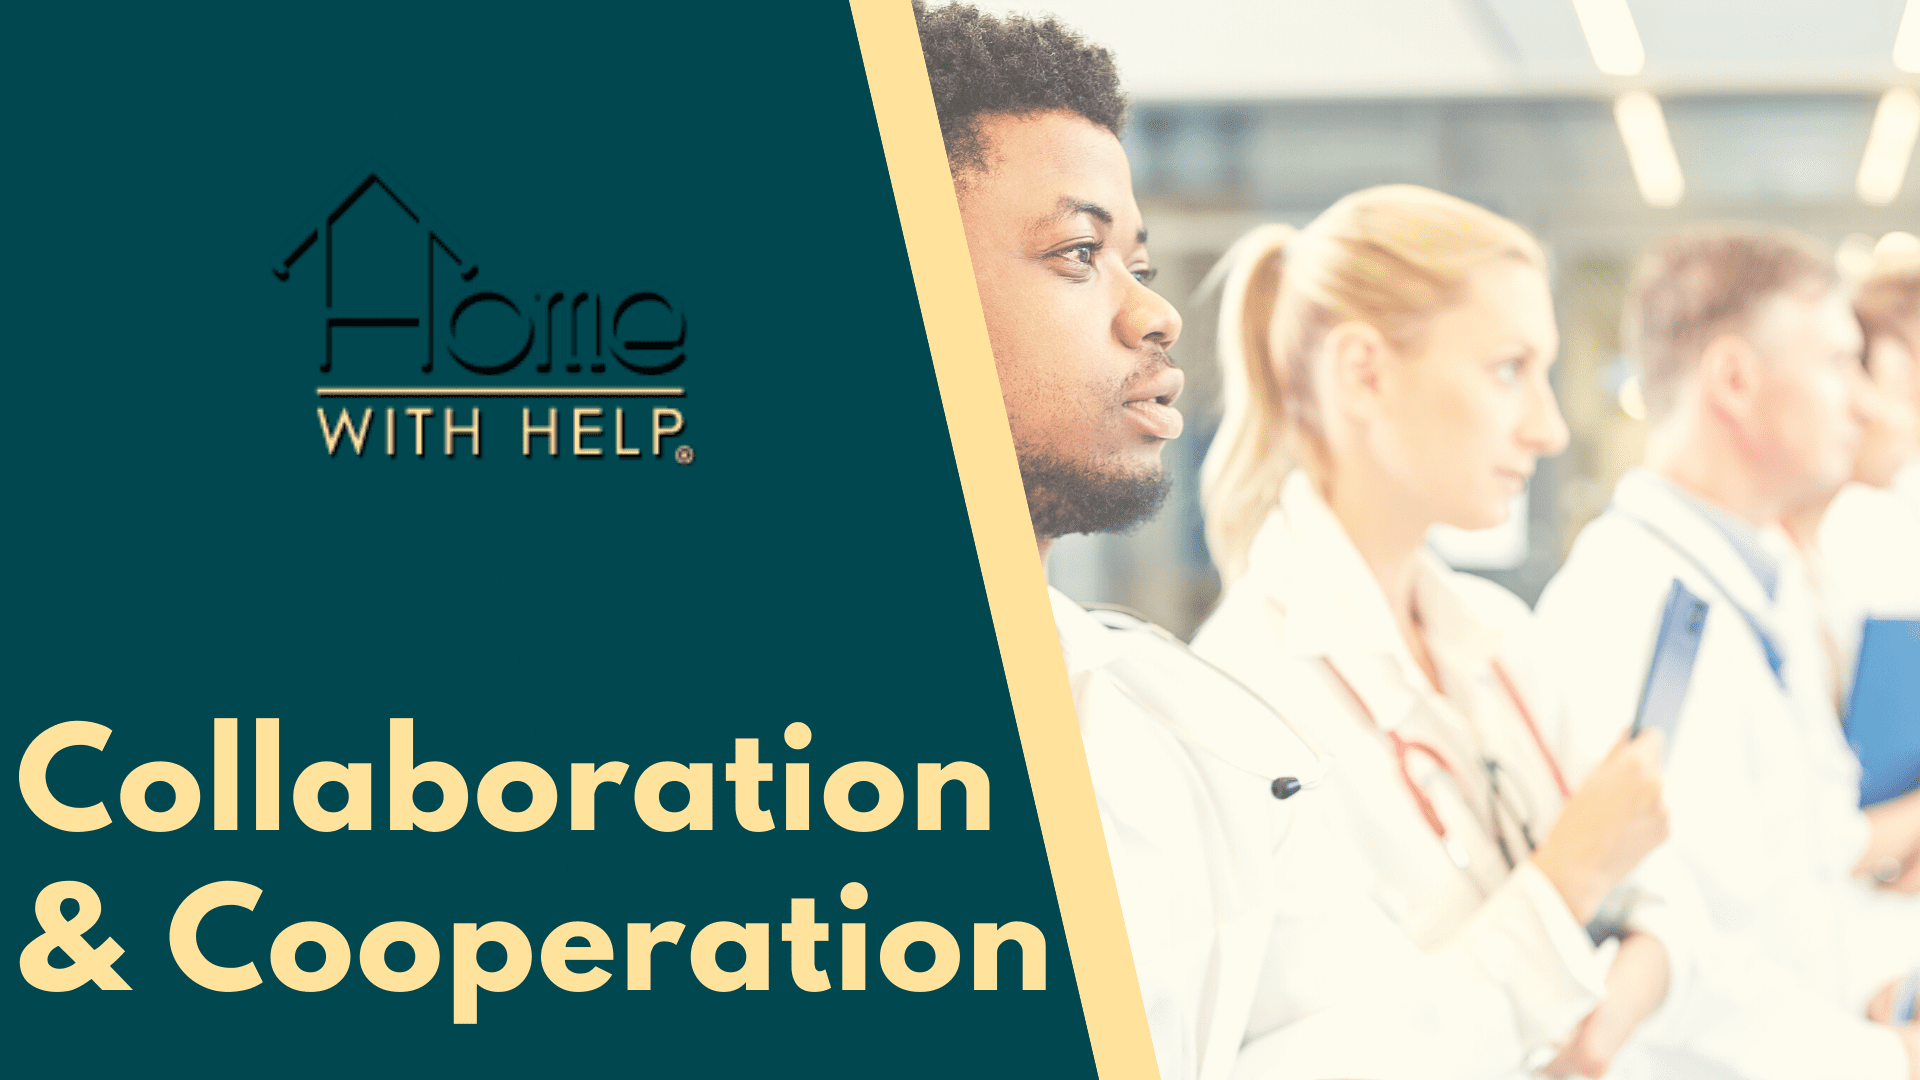 collaboration and cooperation in healthcare industry